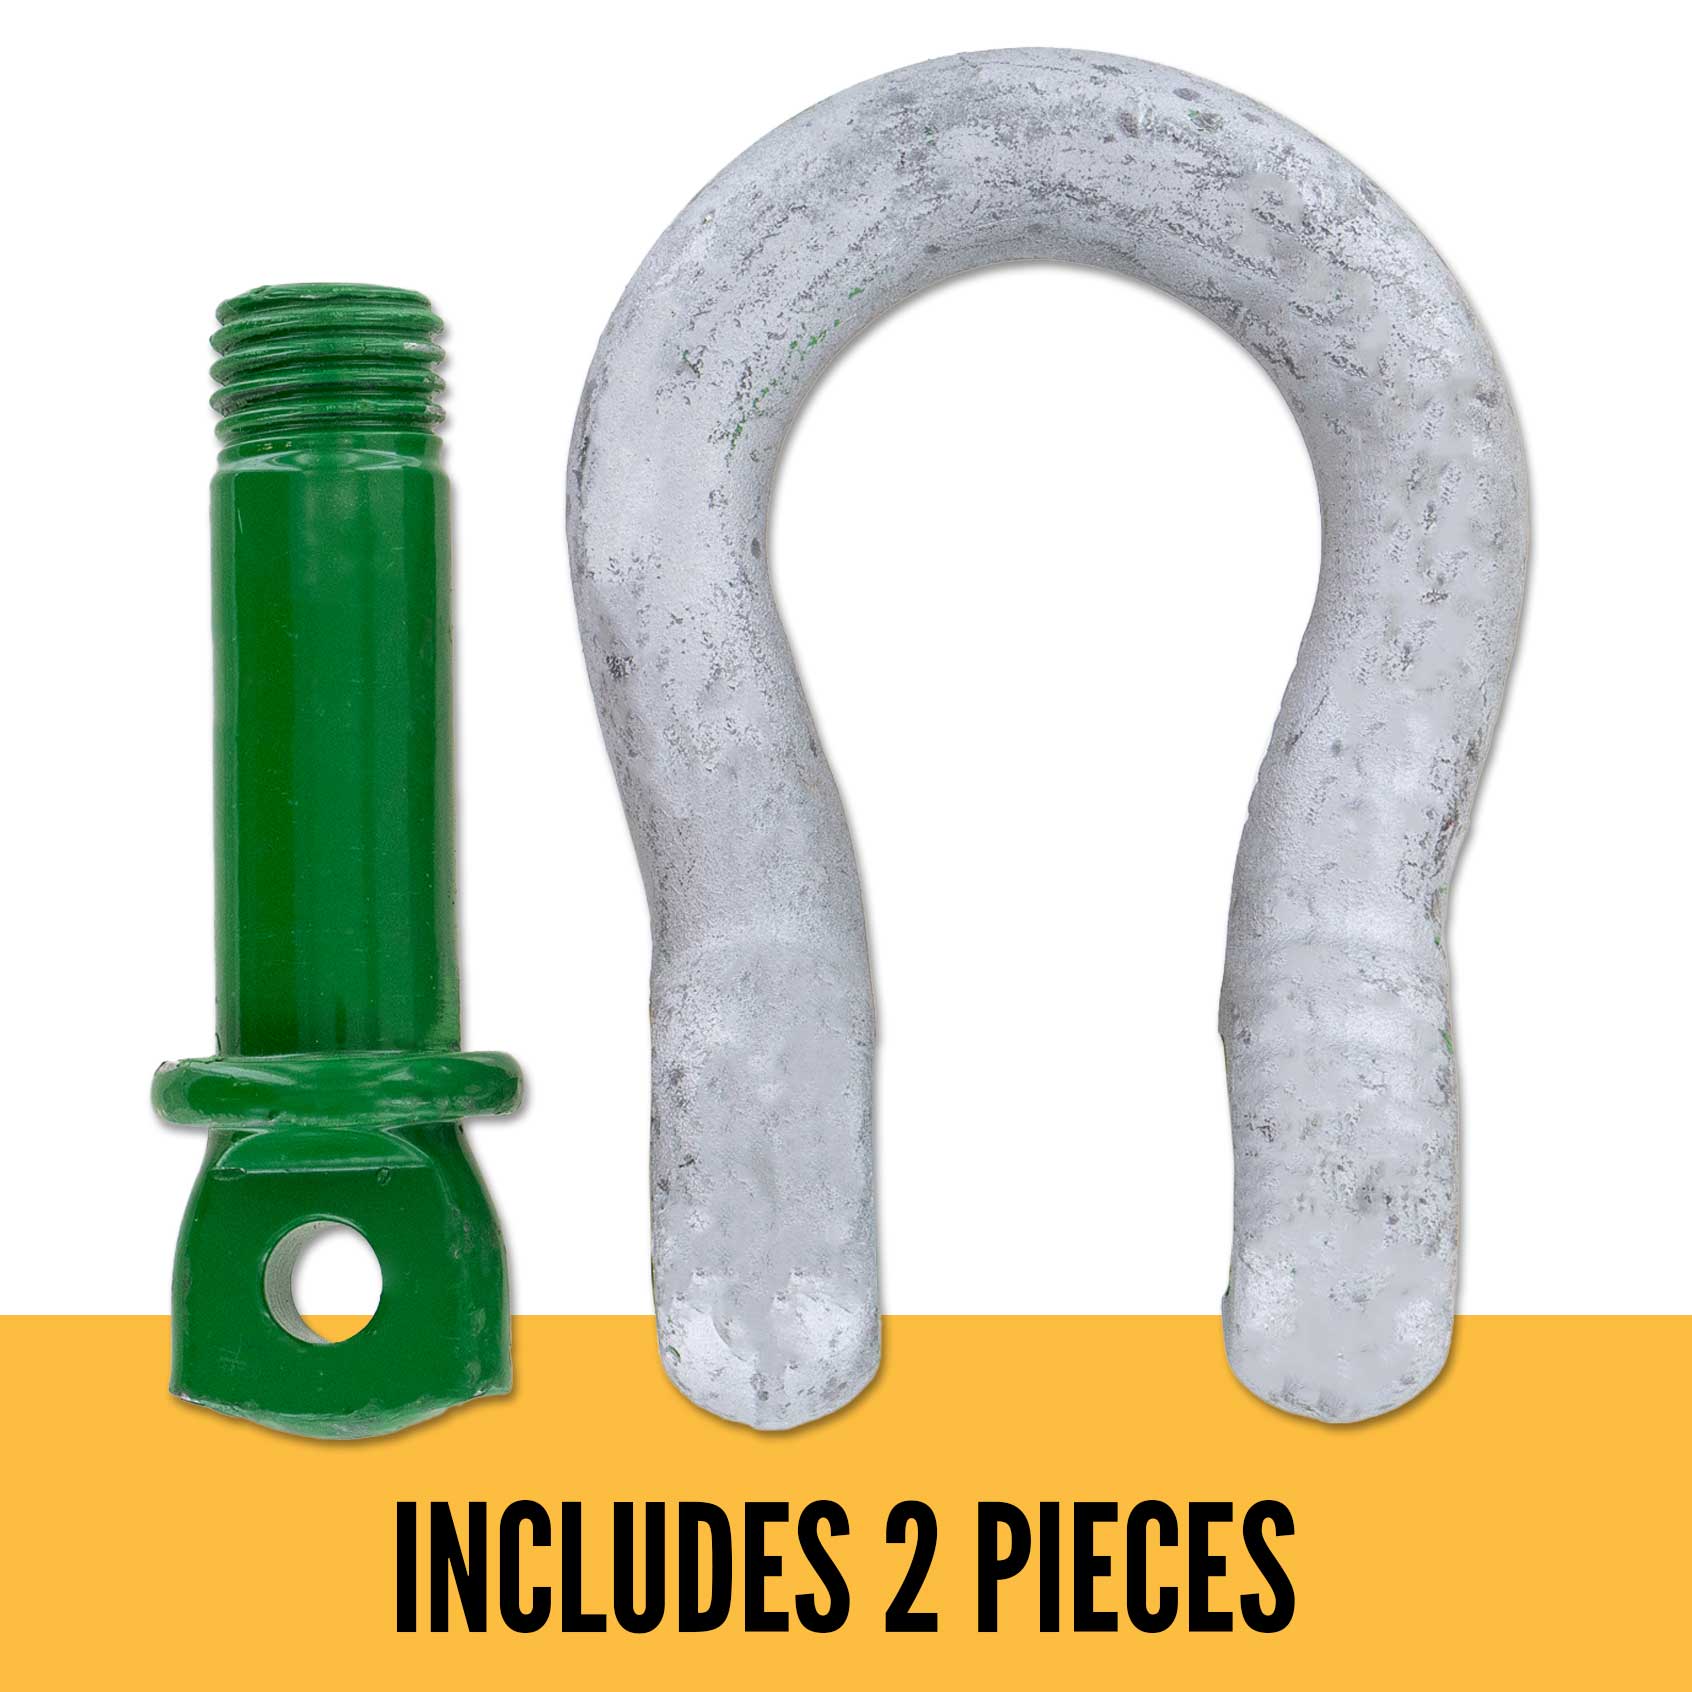 1/2" Van Beest Green Pin® Screw Pin Anchor Shackle | G-4161 - 2 Ton parts of a shackle